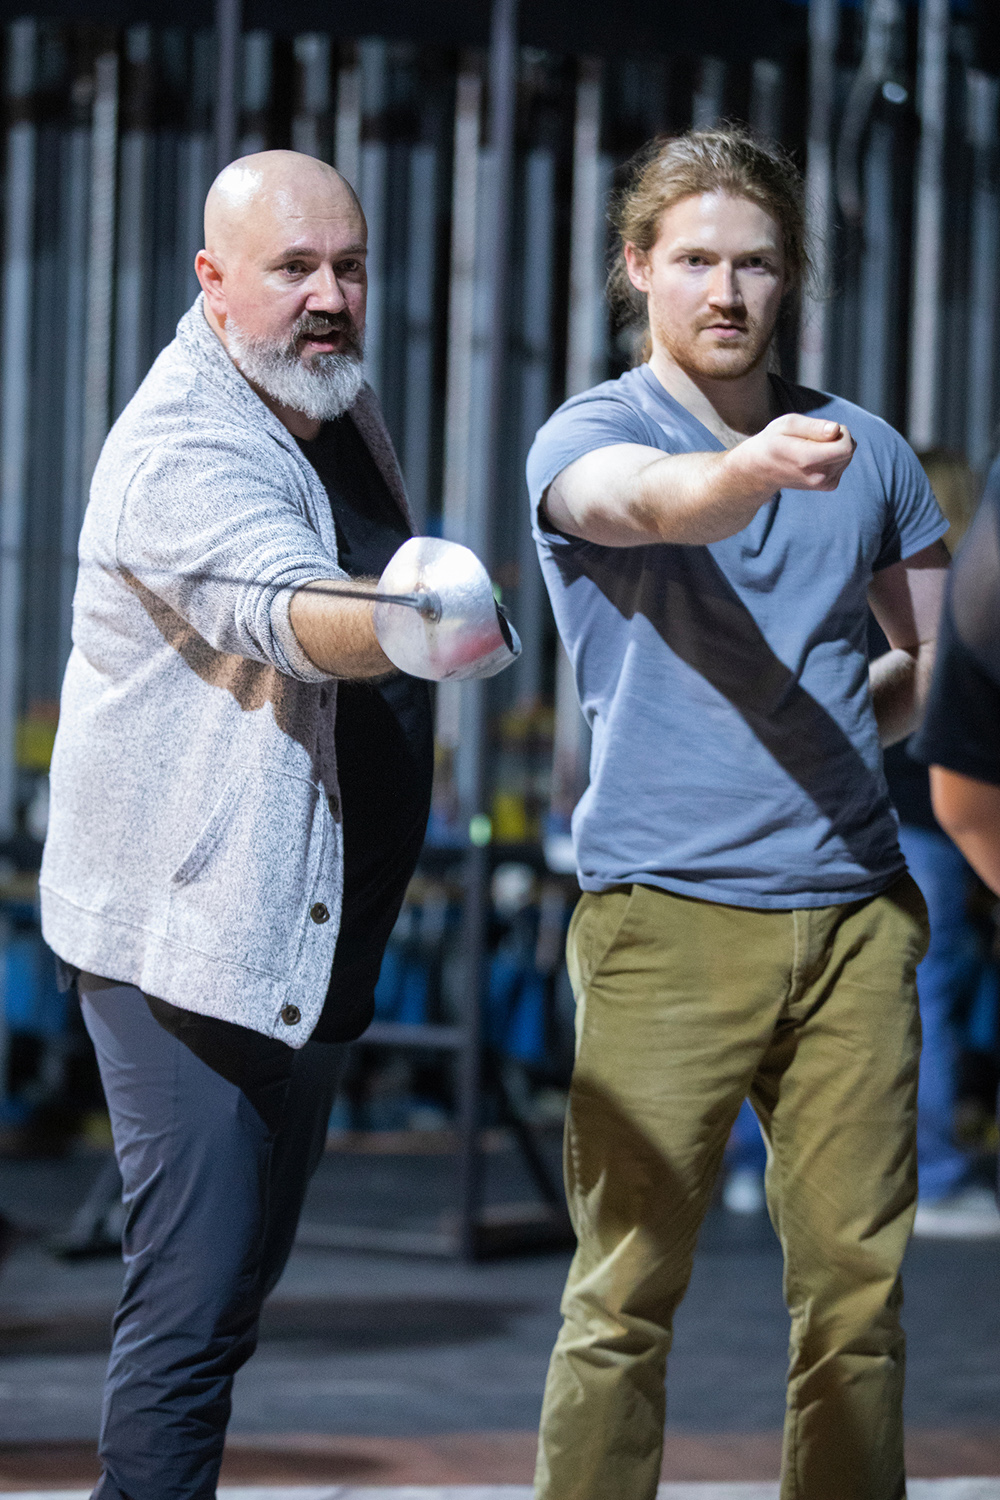 two people practicing stage combat